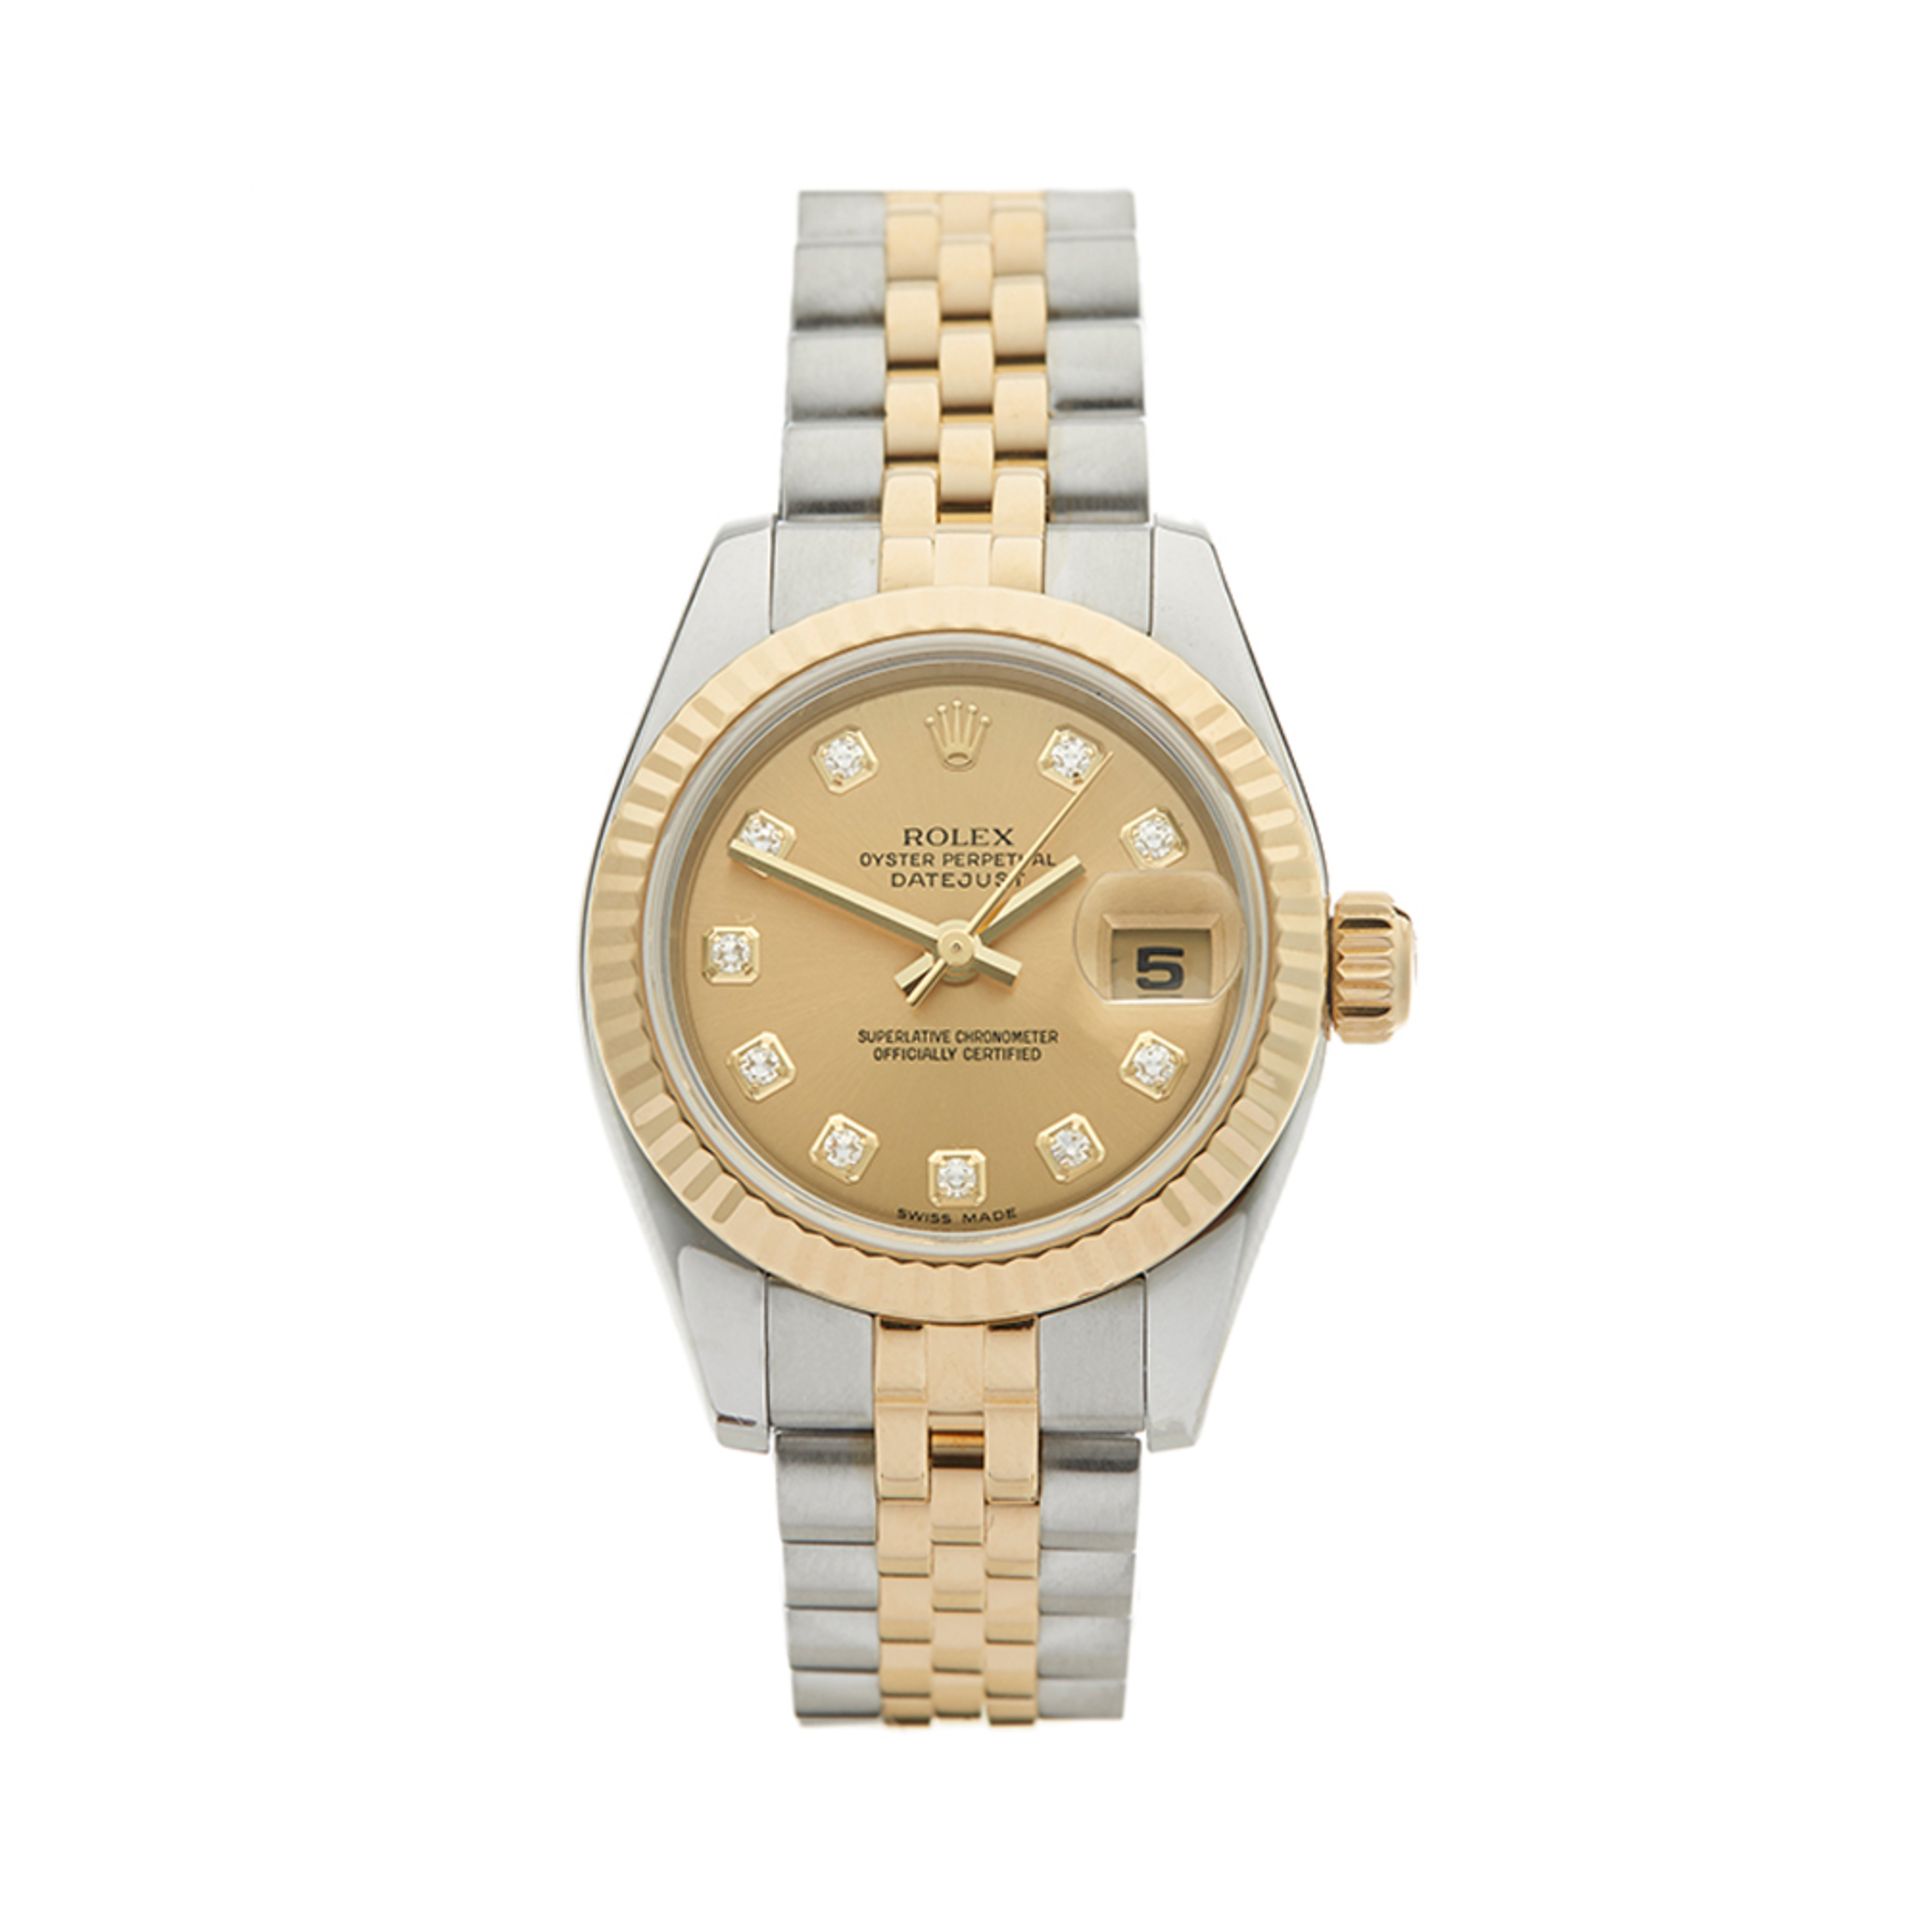 Datejust 26mm Stainless Steel & 18K Yellow Gold - 179173 - Image 2 of 8